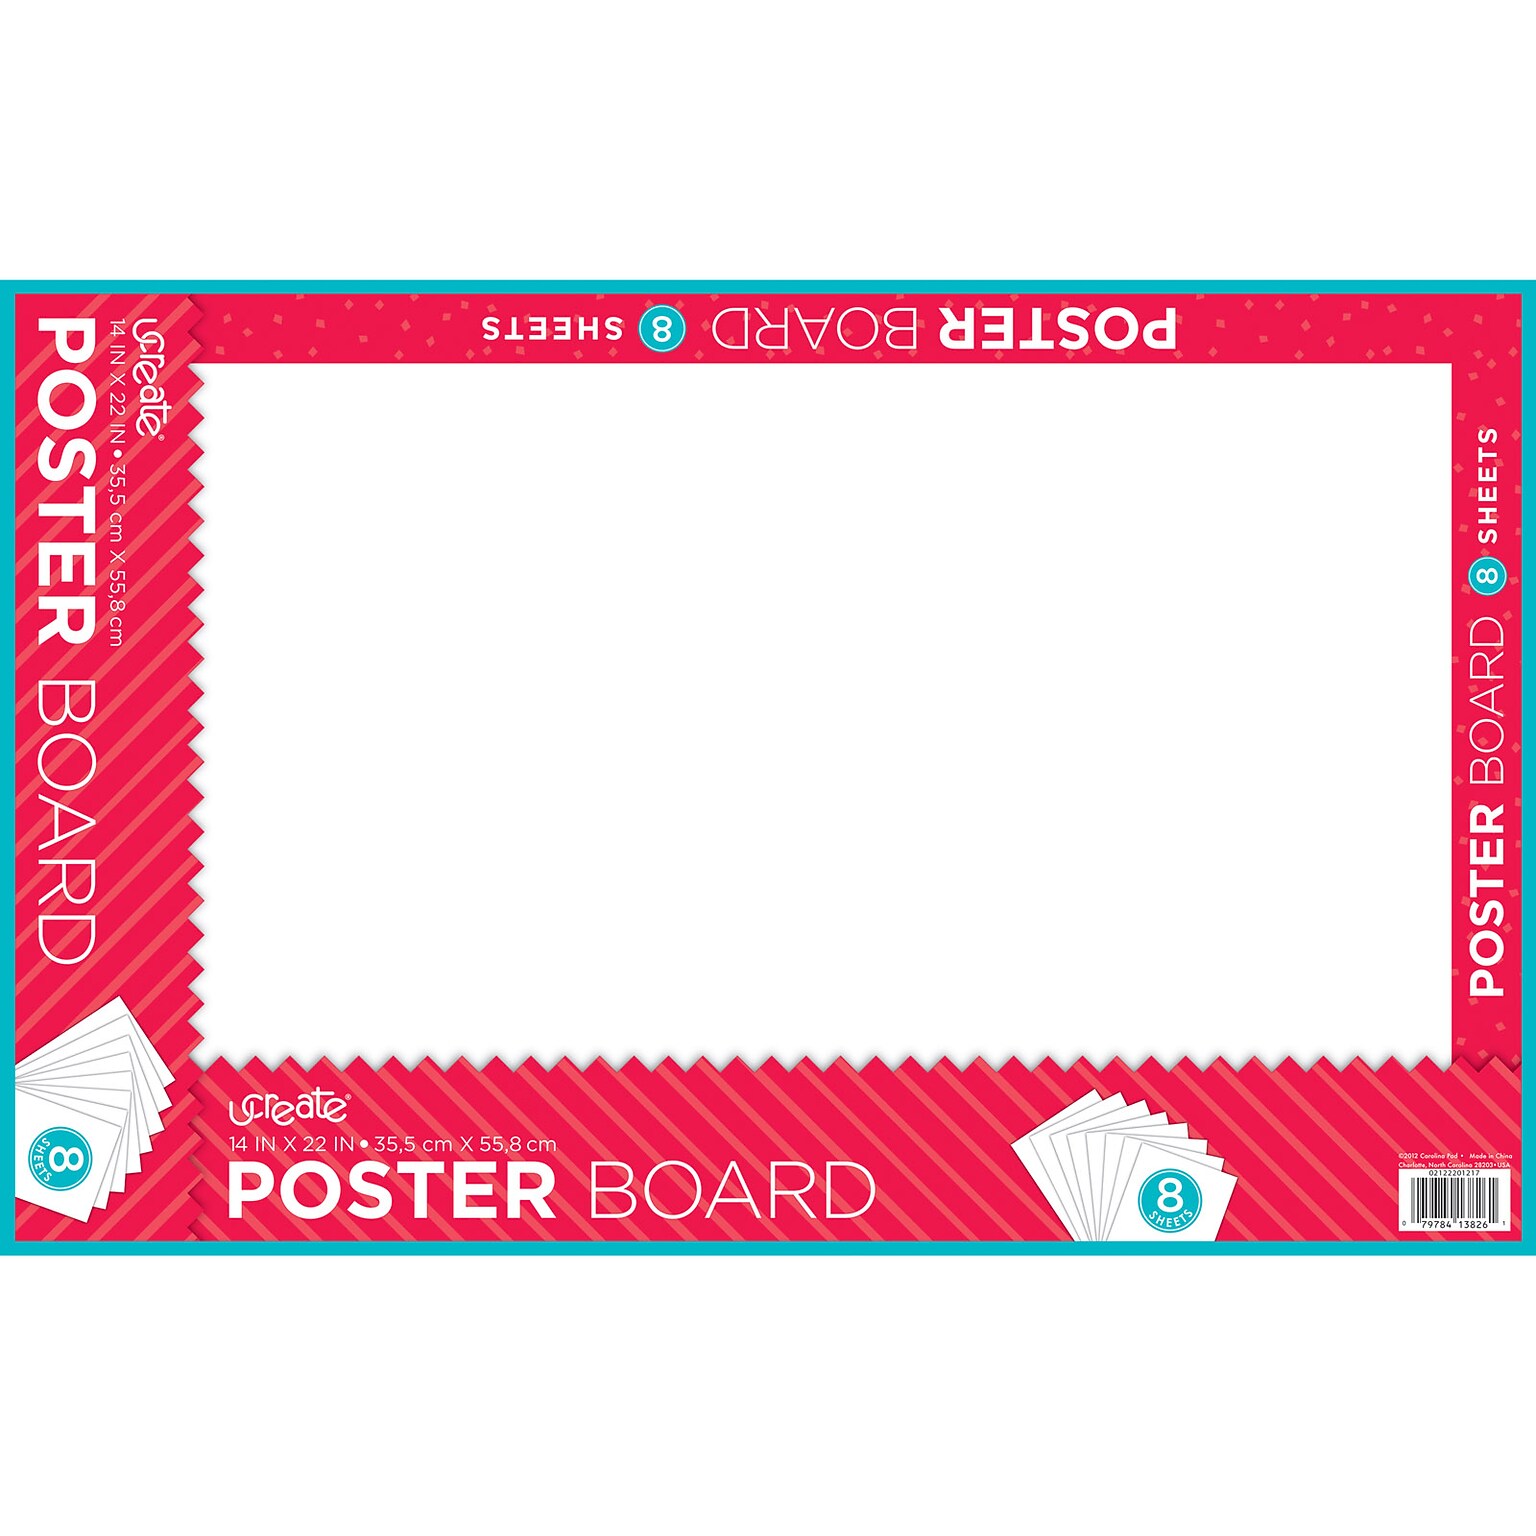 UCreate Paper Poster Board, 14 x 22, White, 8 Sheets/Pack, Carton of 24 Packs (PACCAR37439)